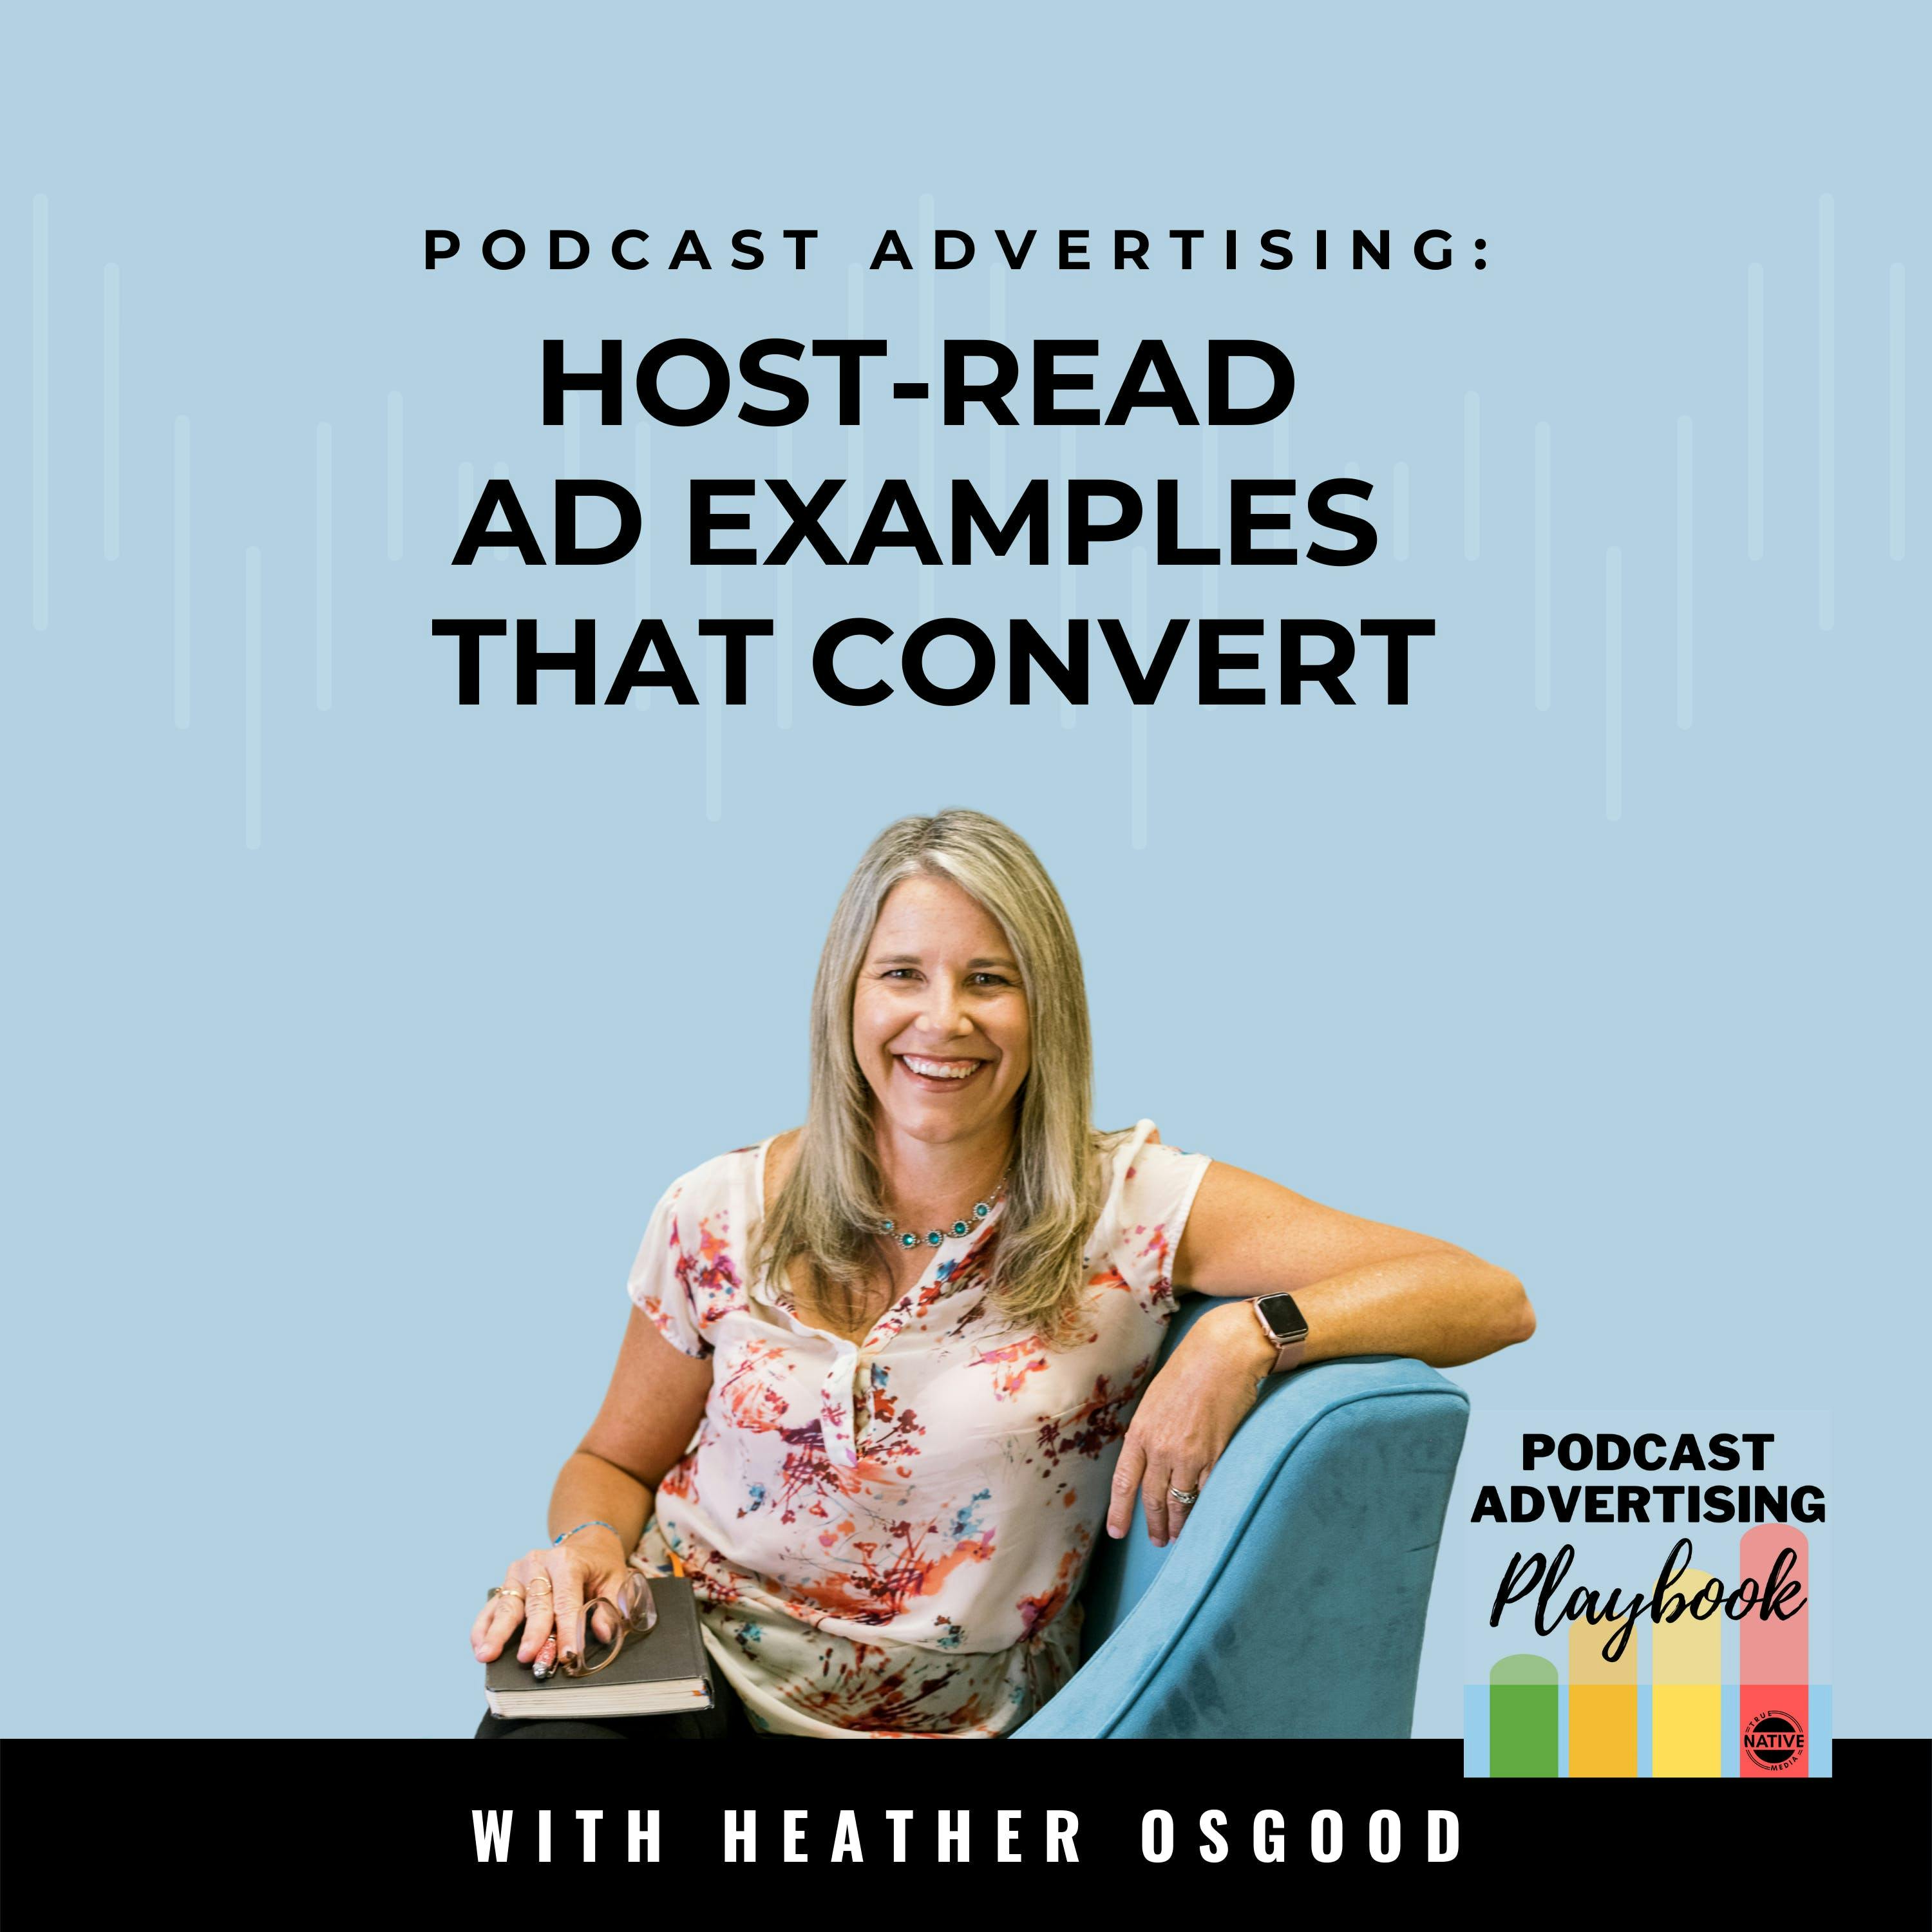 3 Podcast Advertising Examples That Generate Revenue